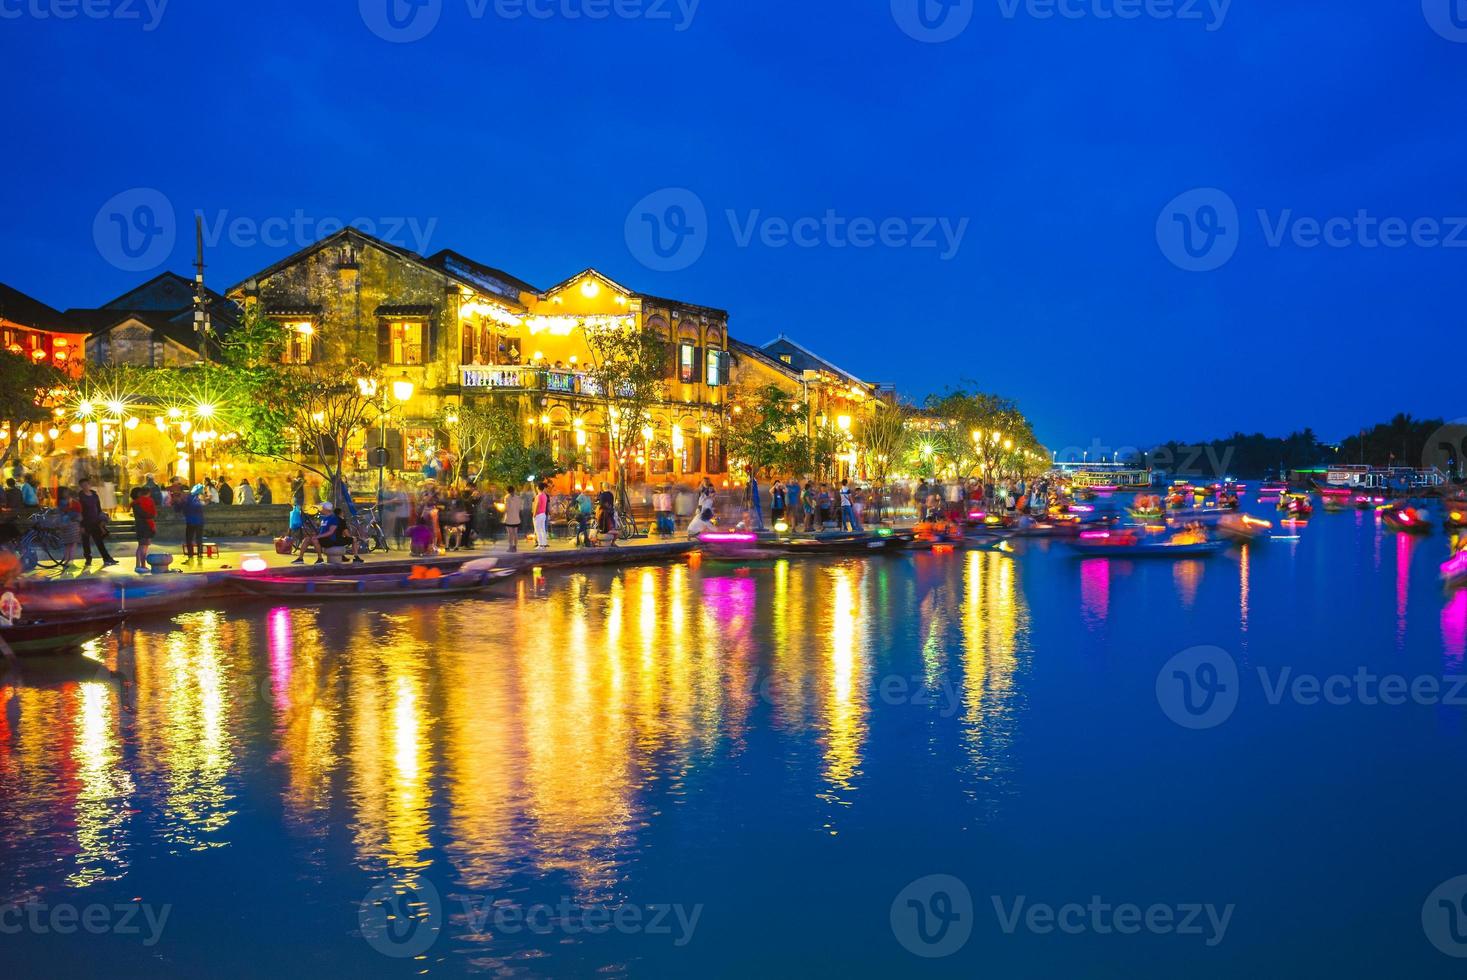 Hoi An ancient town by Thu Bon River in Vietnam at night photo